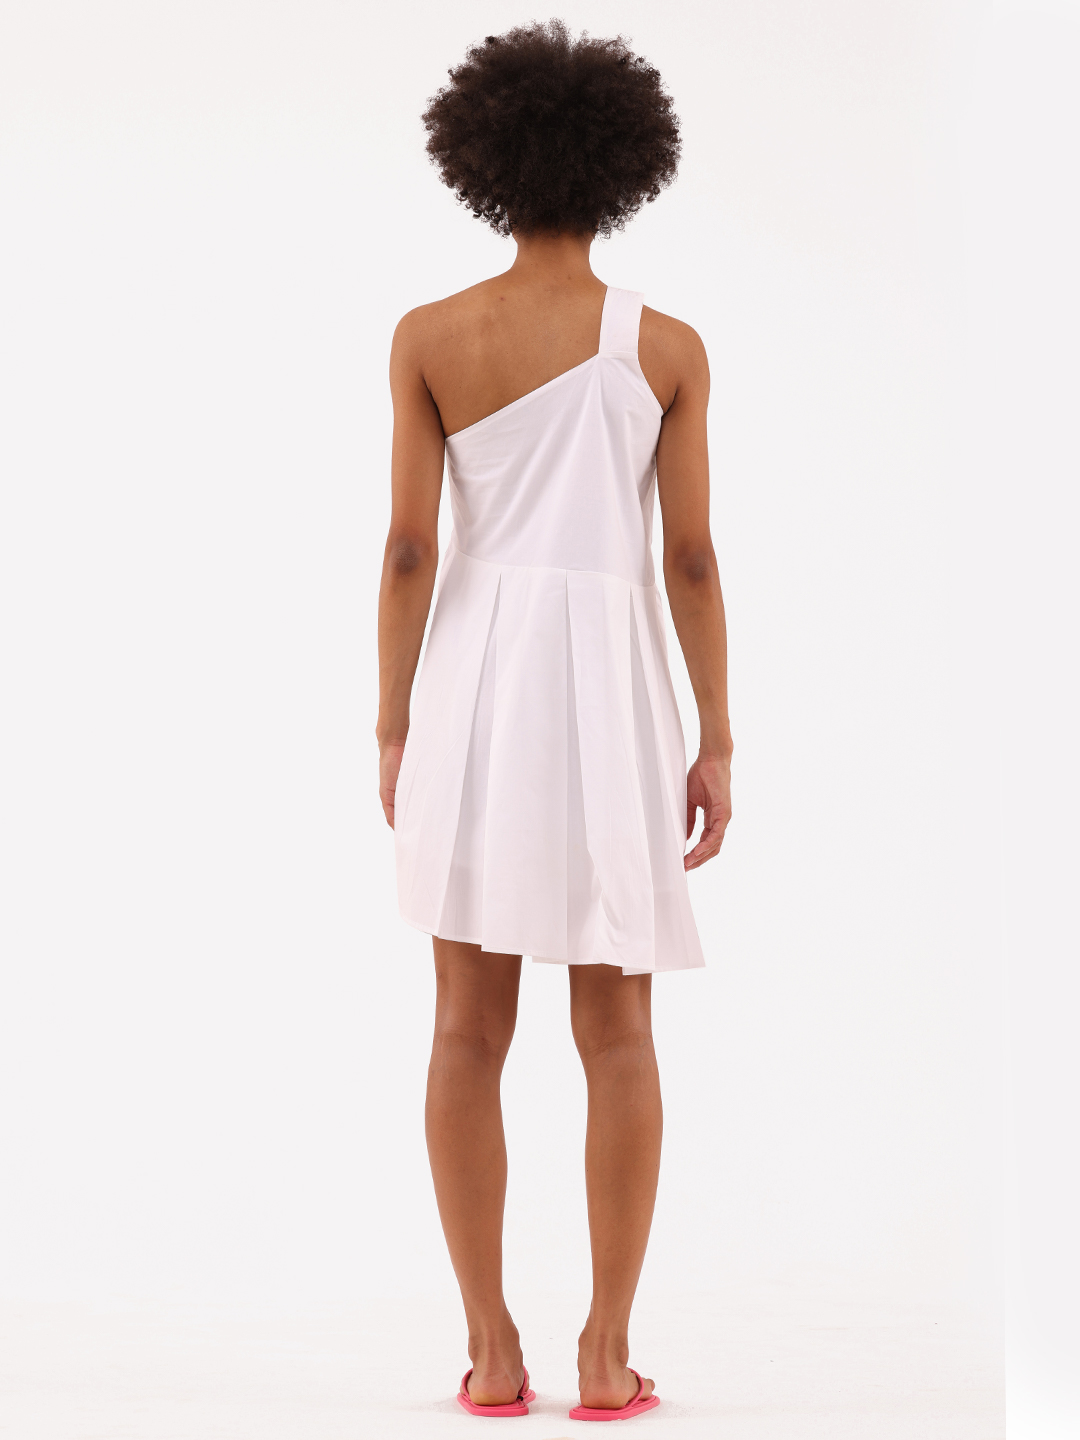 White Pleated One Shoulder Dress - Back